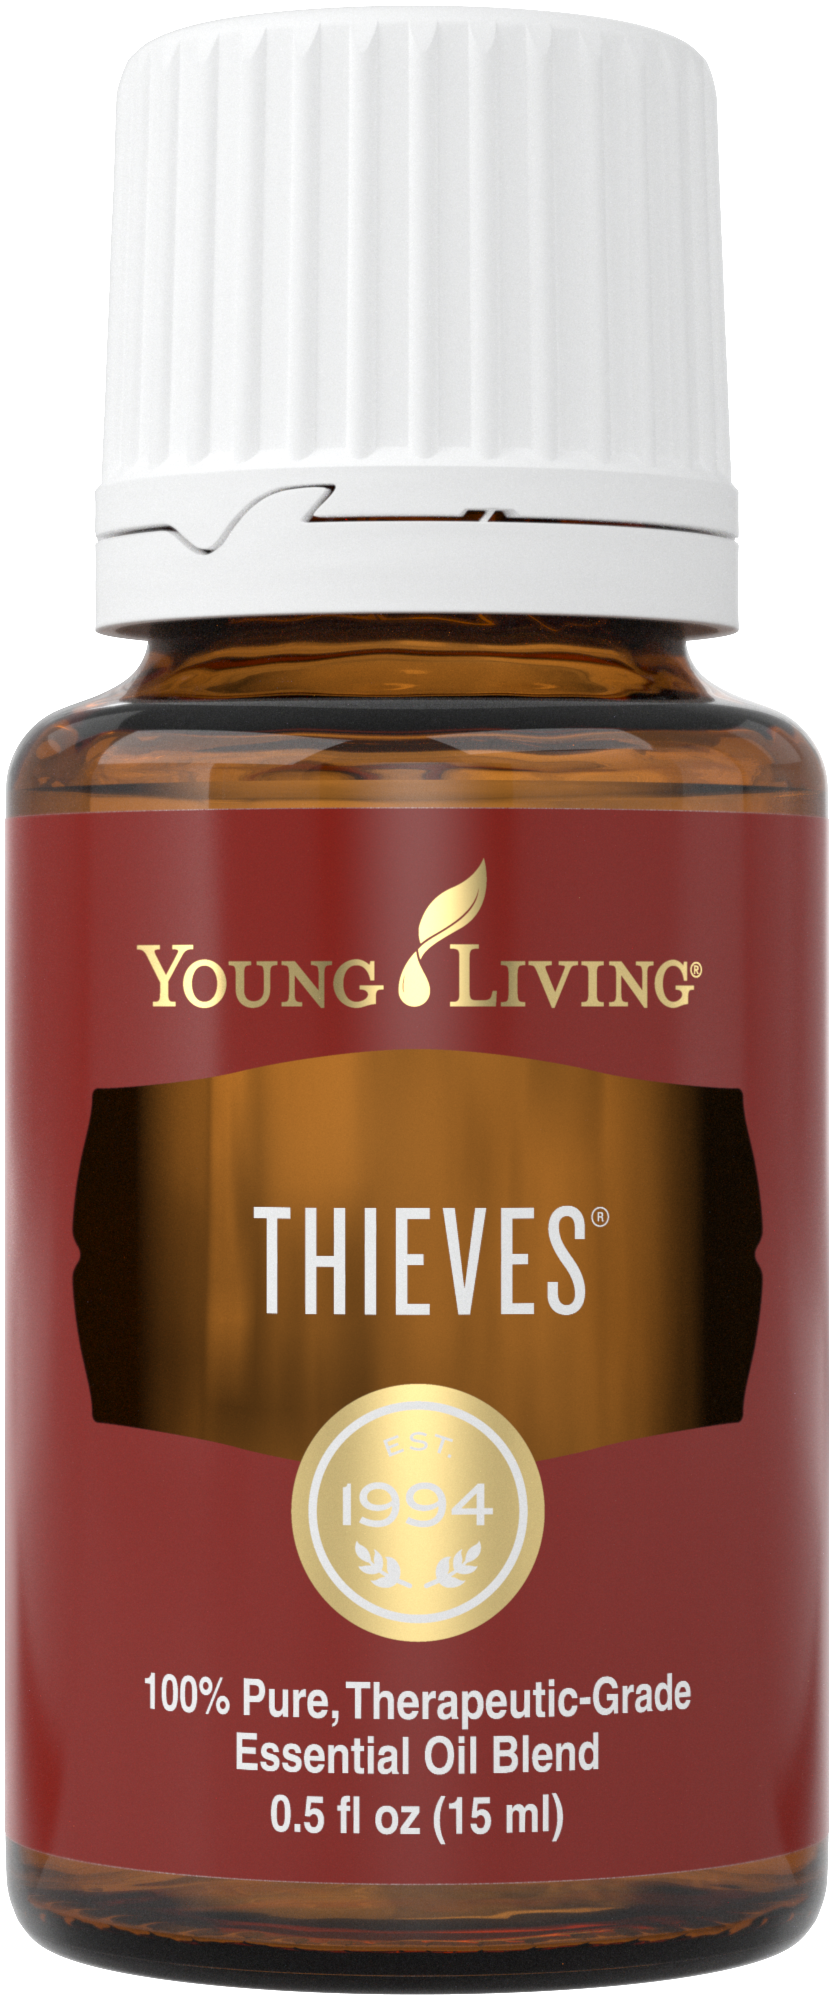 Thieves essential oil blend uses | Young Living